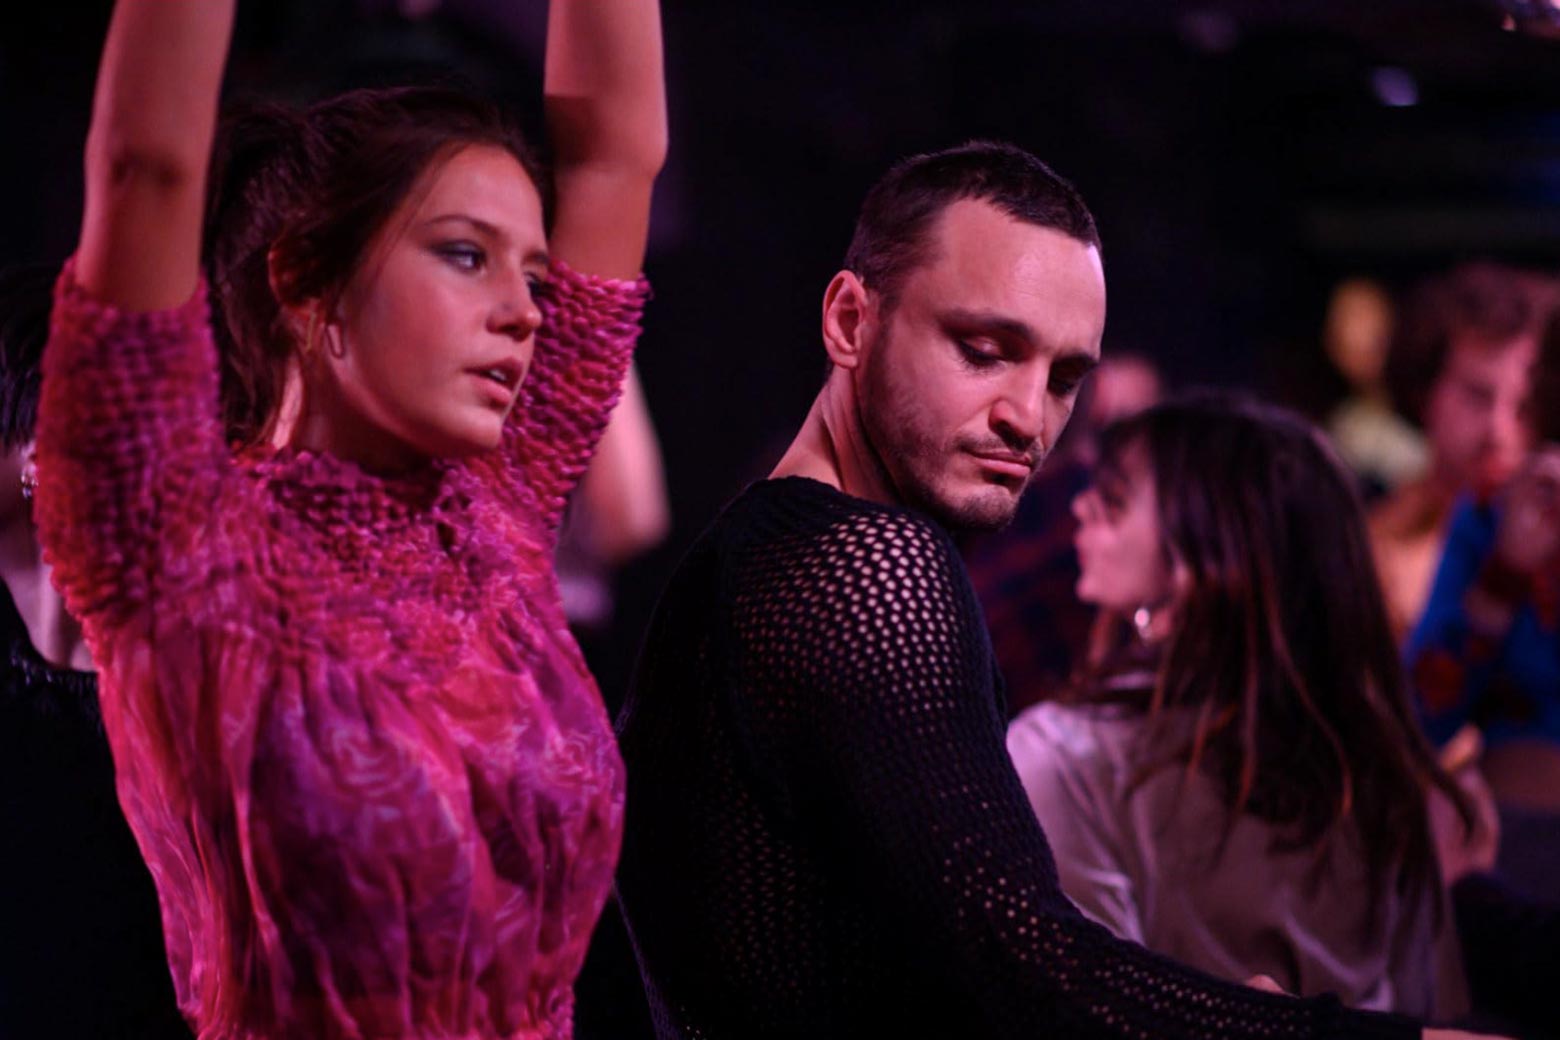 In the dim light of a club, a woman wearing a fuchsia top puts her hands up in the air and dances, while a man standing next to her glances seductively in her direction.